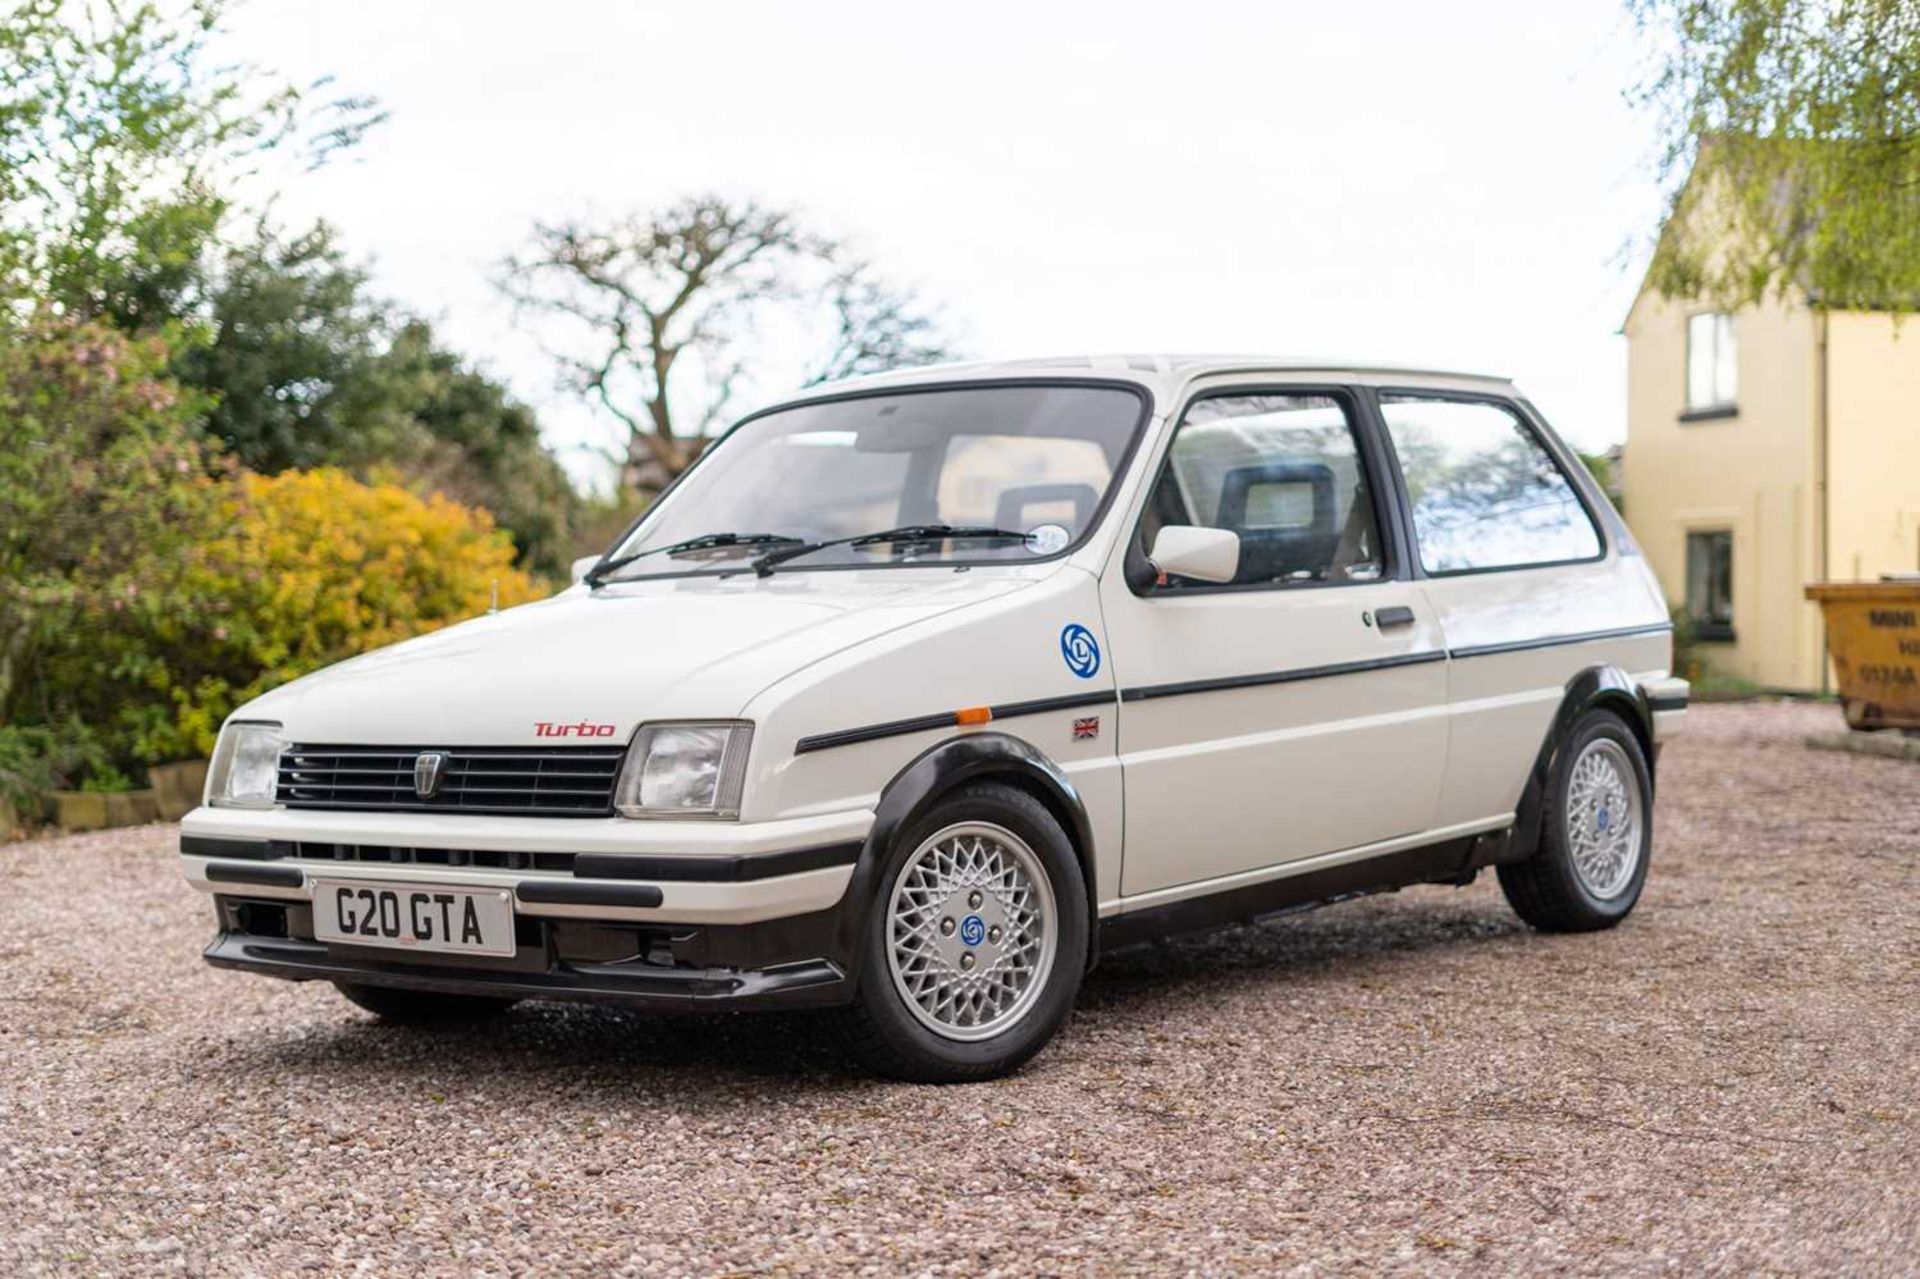 1989 Austin Metro GTa  Offered with the registration ‘G20 GTA’ and a fresh MOT